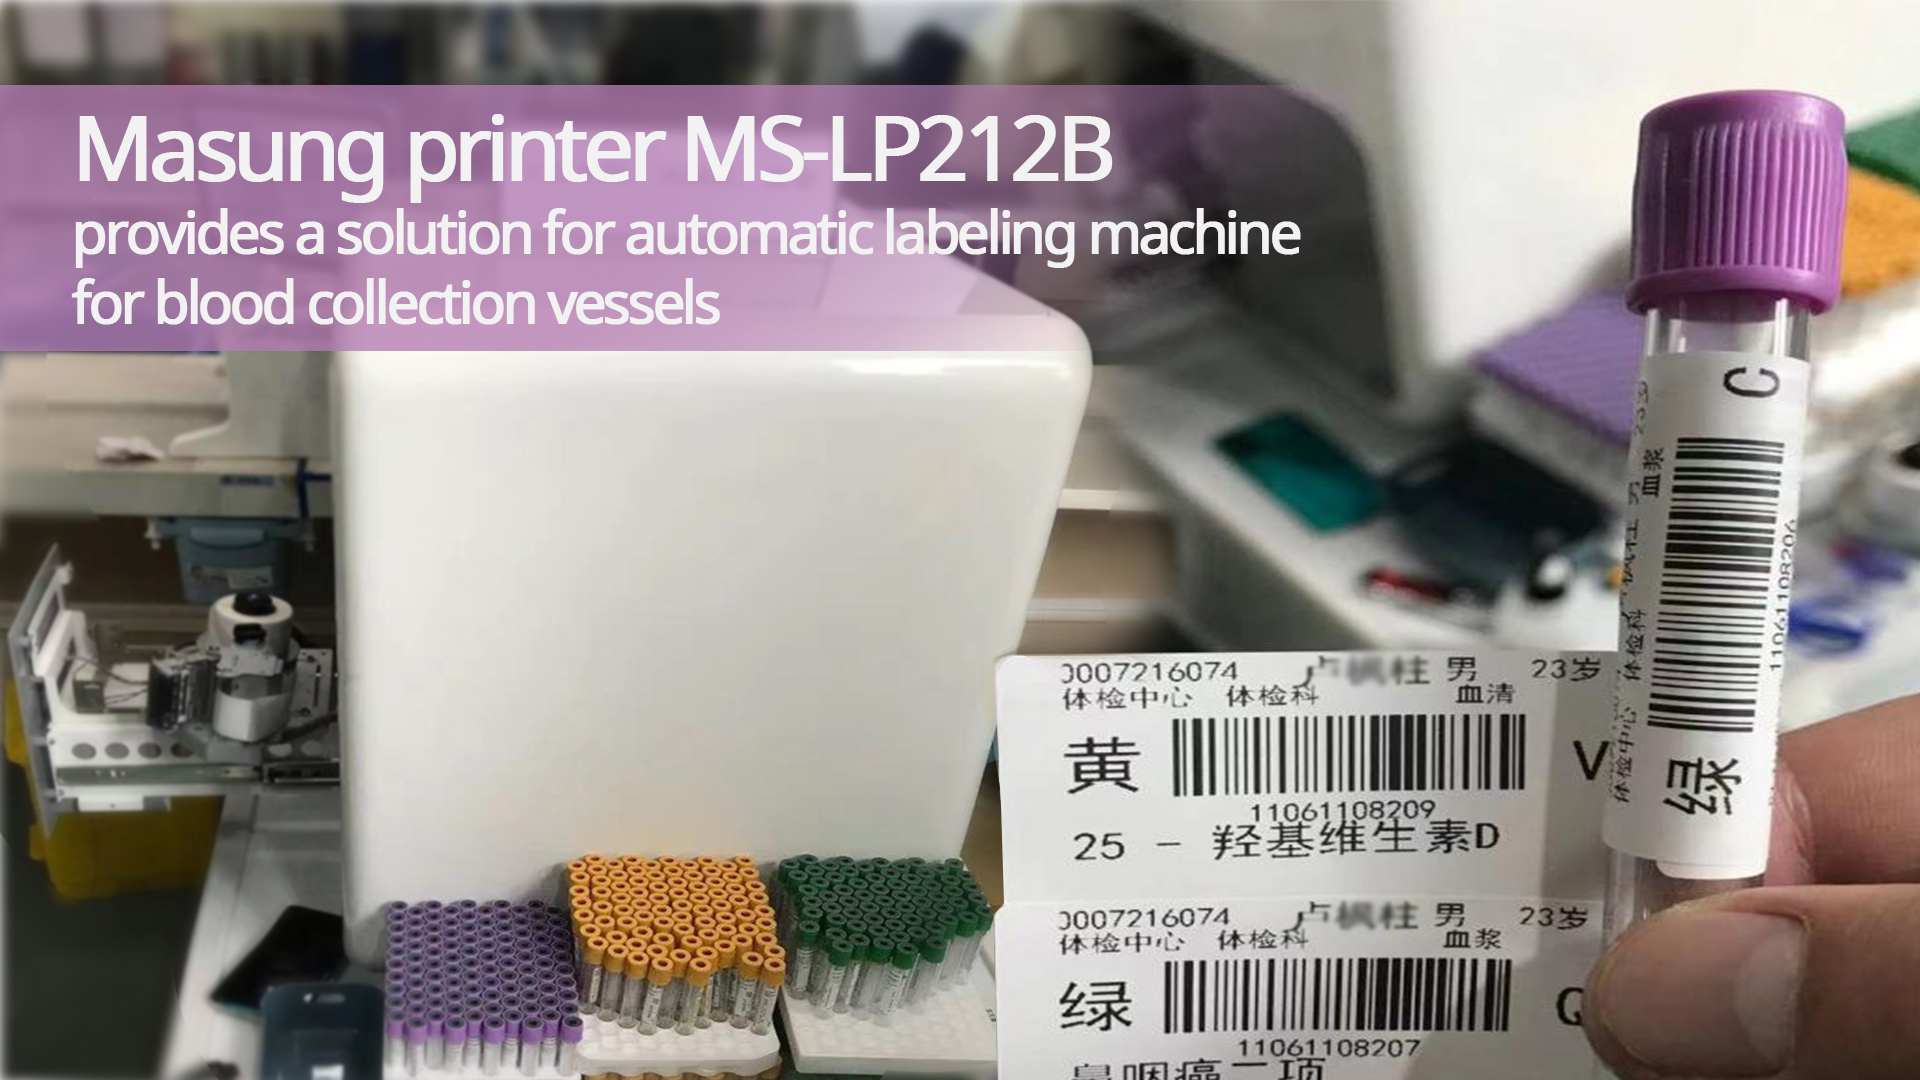 Masung printer MS-LP212B provides a solution for automatic labeling machine for blood collection vessels